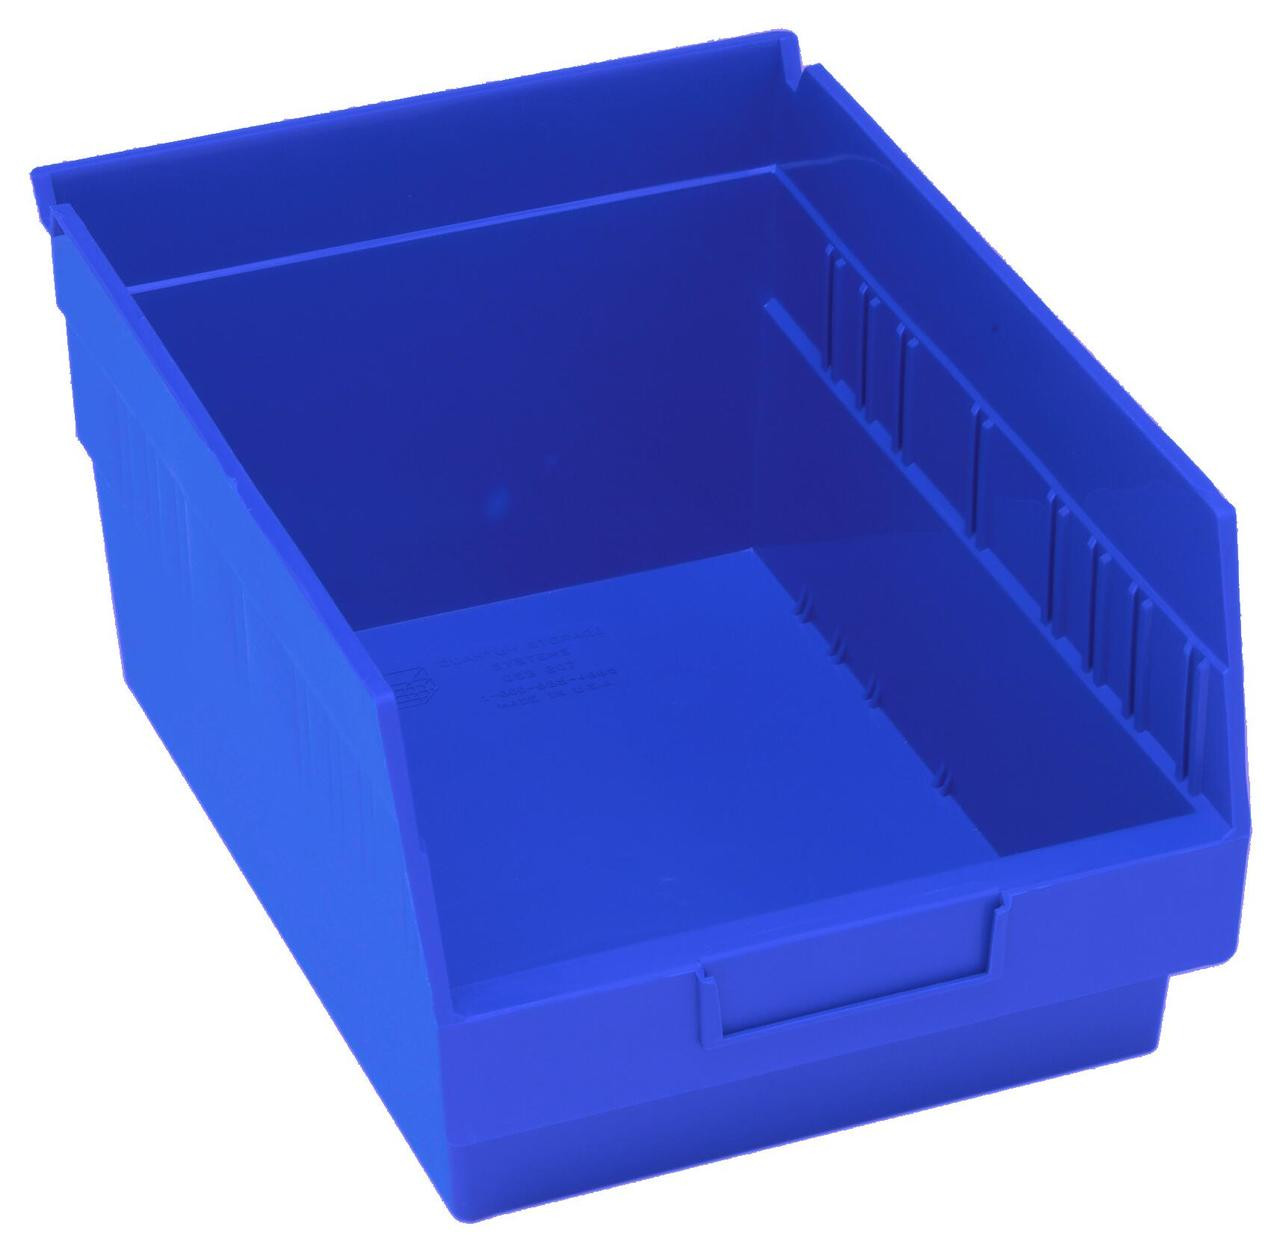 Strong Hold Metal Storage Cabinets with Quantum Plastic Bins